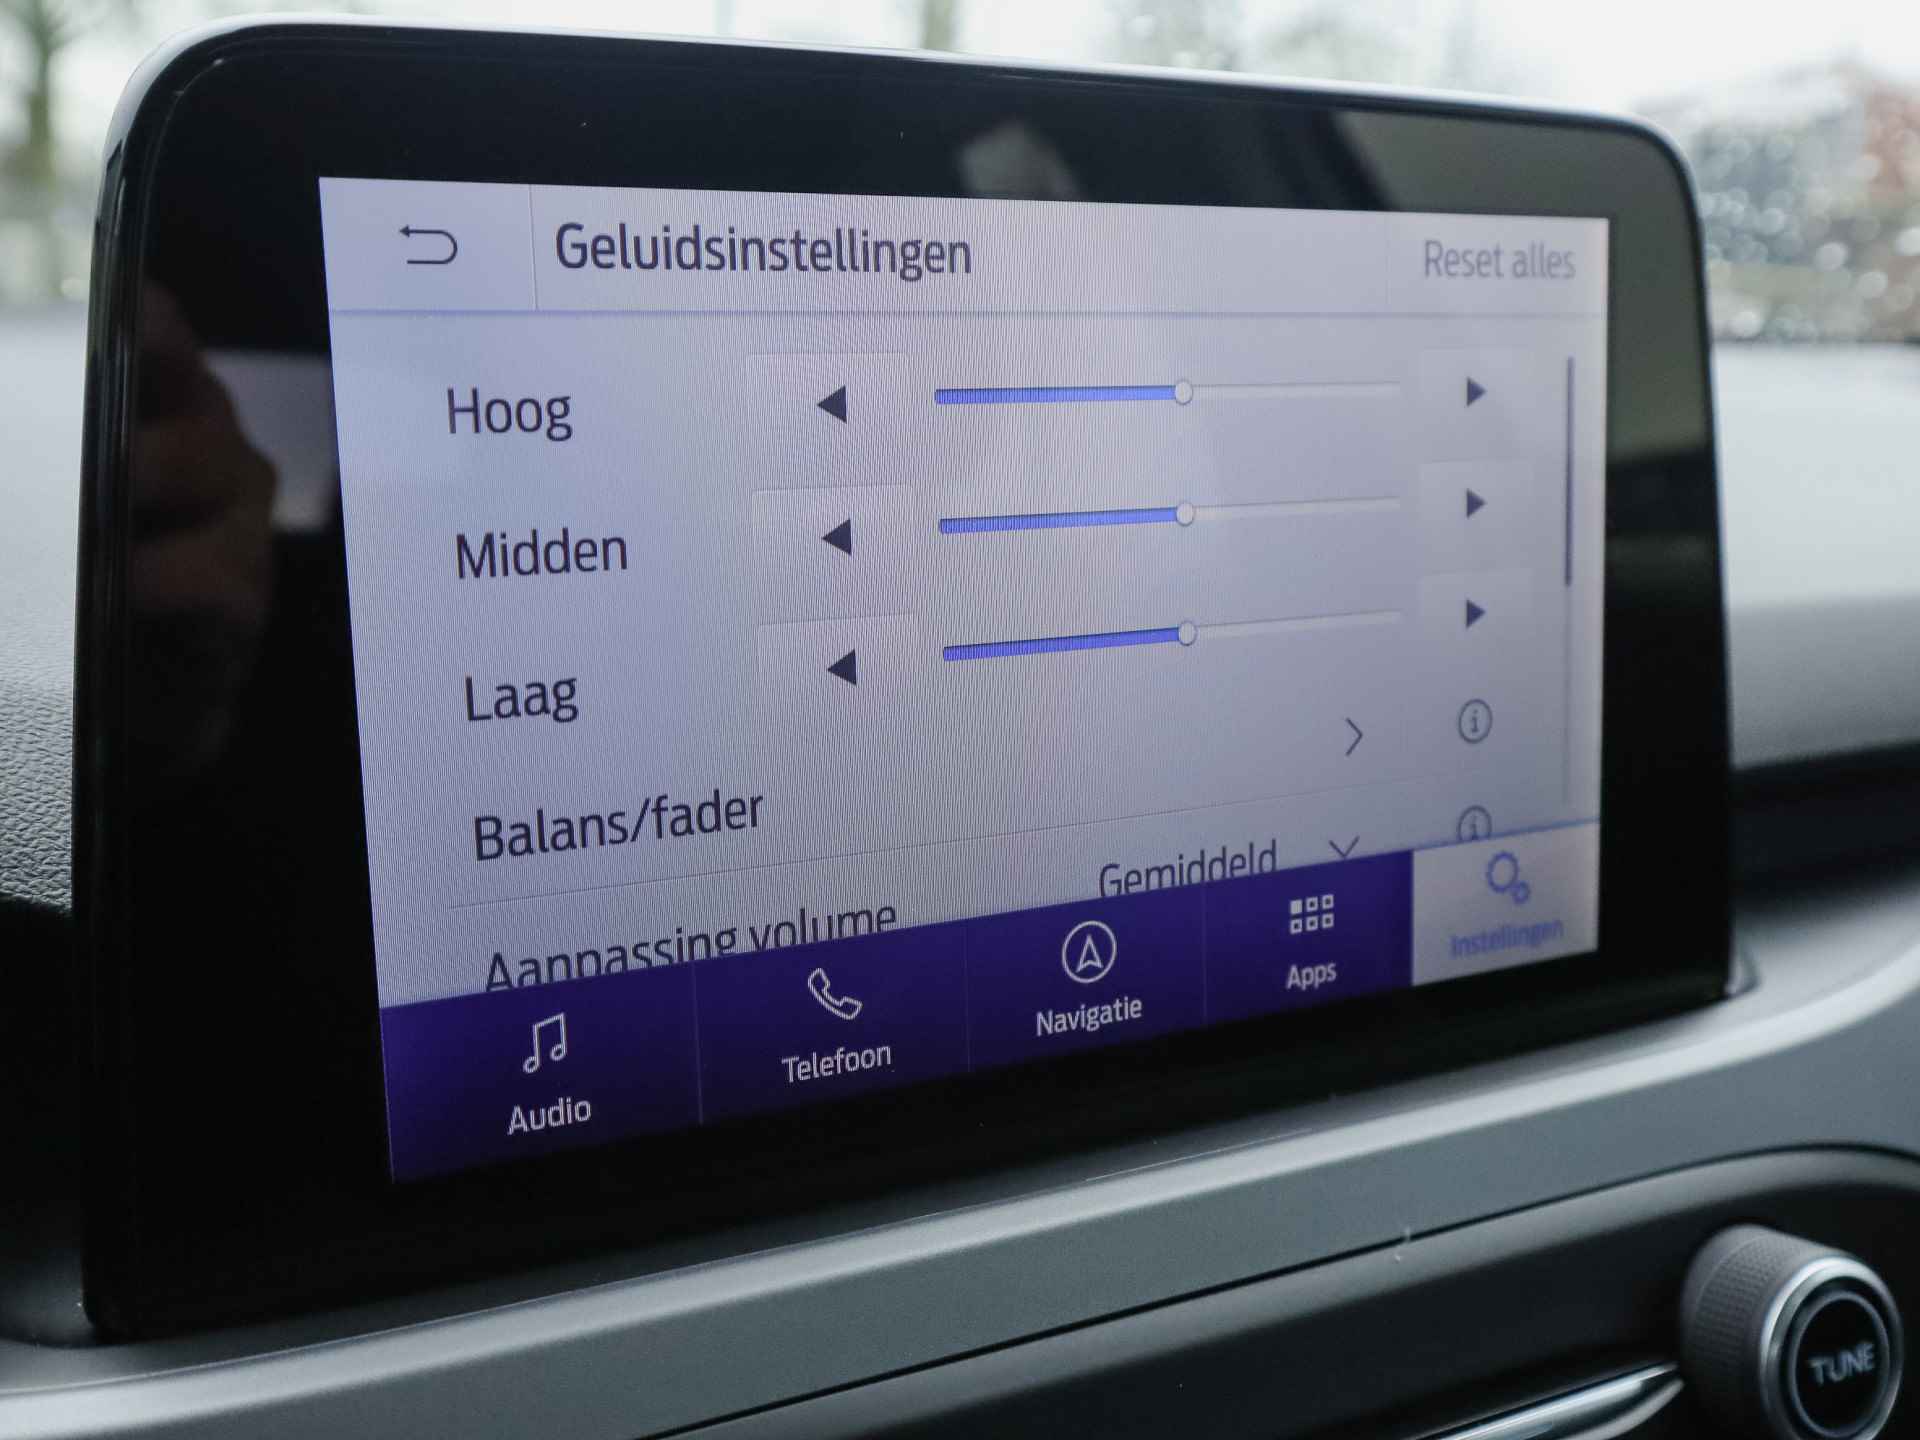 Ford Focus 1.0i Hybrid Connected, (149PK) 1e-Eig, Ford-Dealer-Onderh, 12-Mnd-BOVAG, NL-Auto, Navigatie/Apple-Carplay/Android-Auto, Parkeersensoren-V+A, Cruise-Control, Airco, DAB, Lane-Assist, Privacy-Glas, Sportstoelen, Led-Koplampen, Adaptieve-Cruise-Control - 52/55